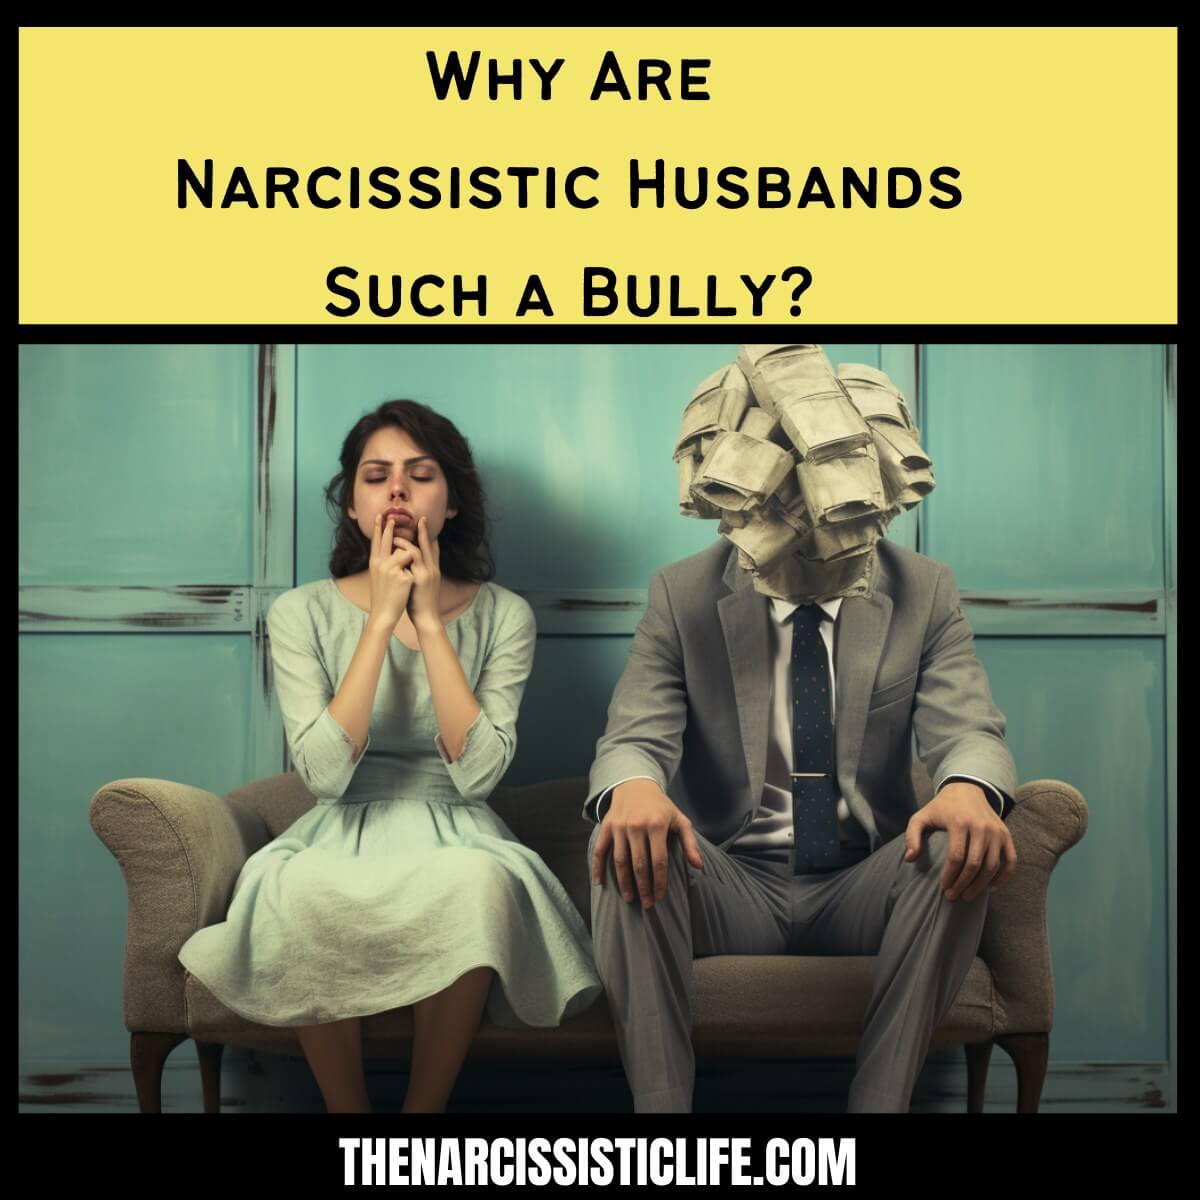 10 Signs You Are Married to a Narcissistic Husband?